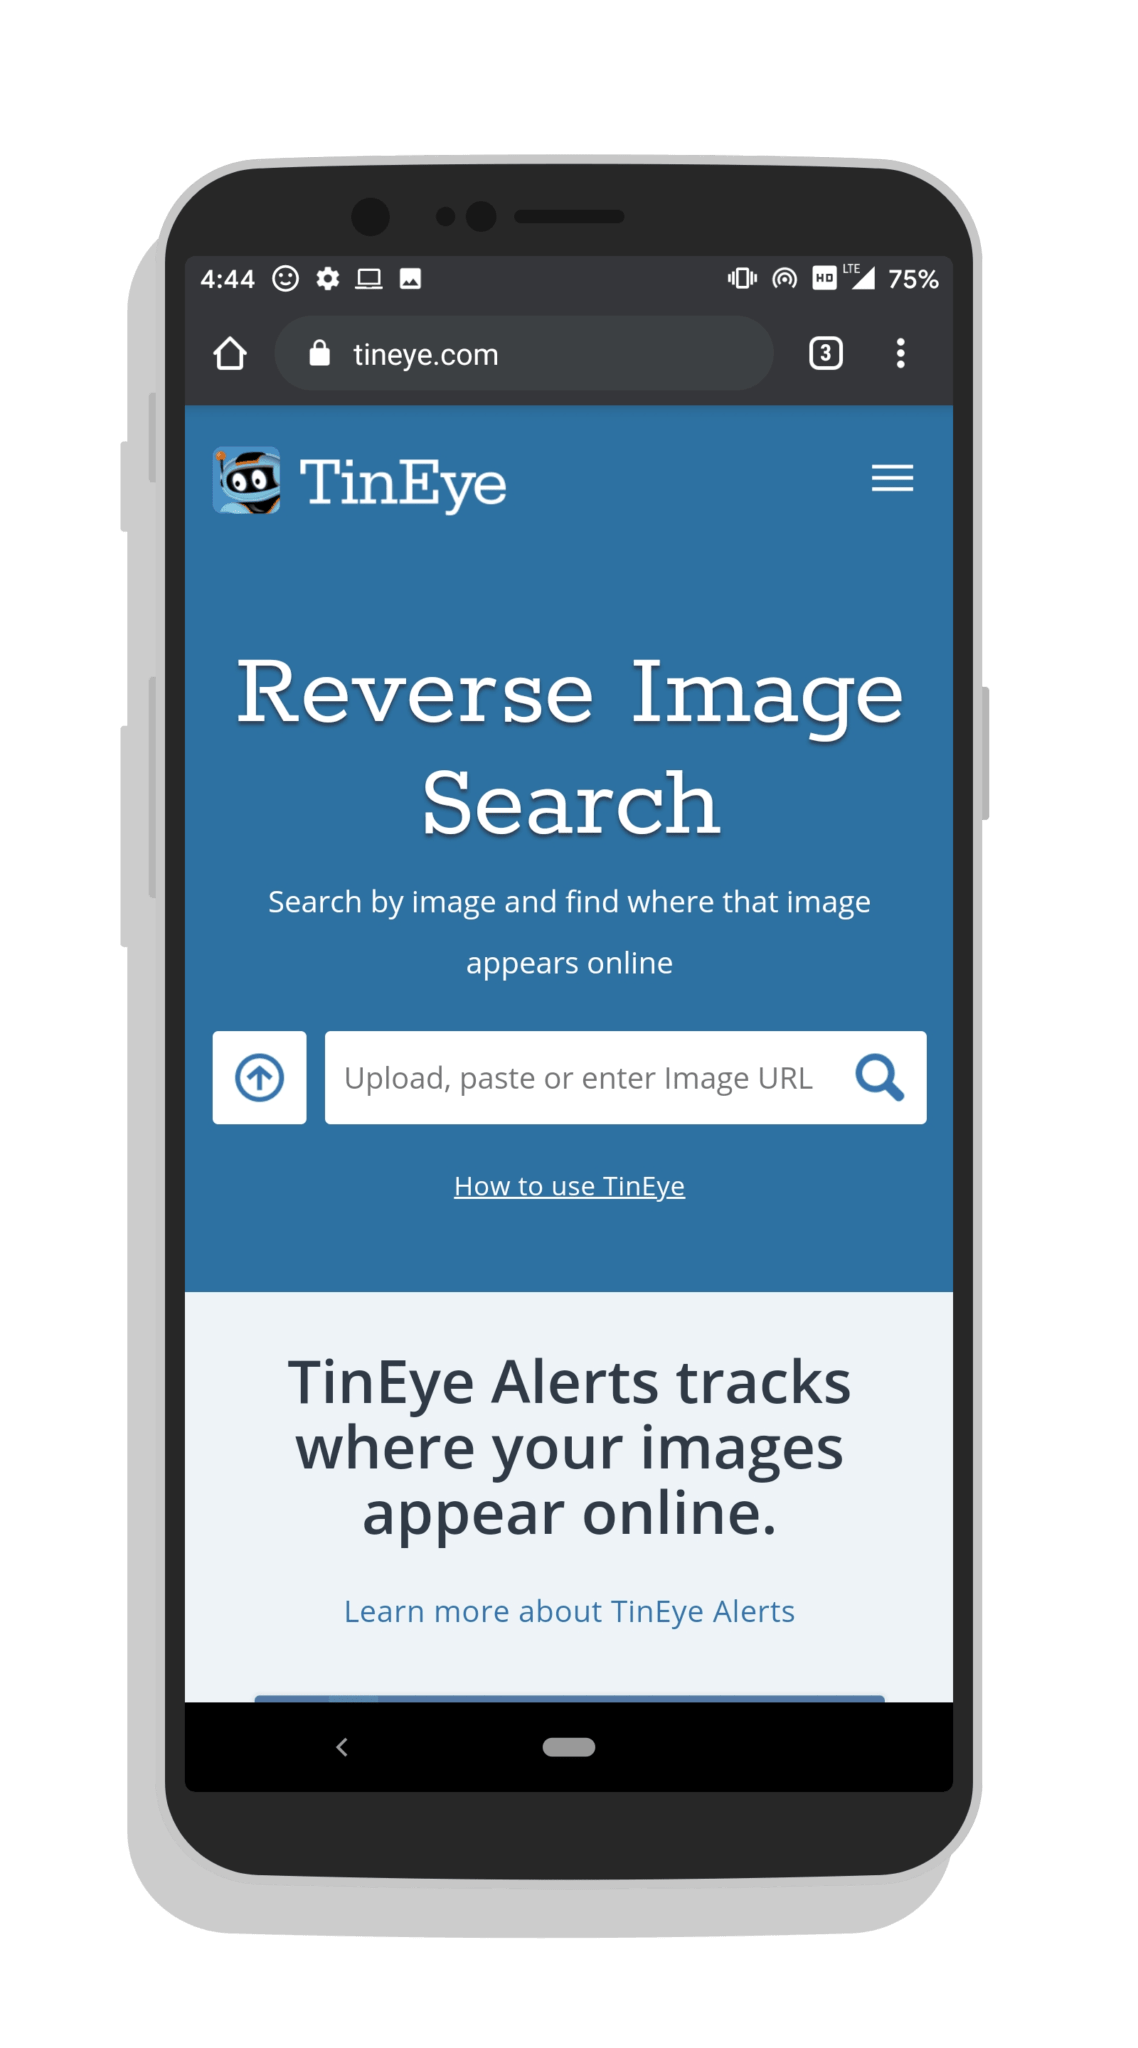 reverse image search online